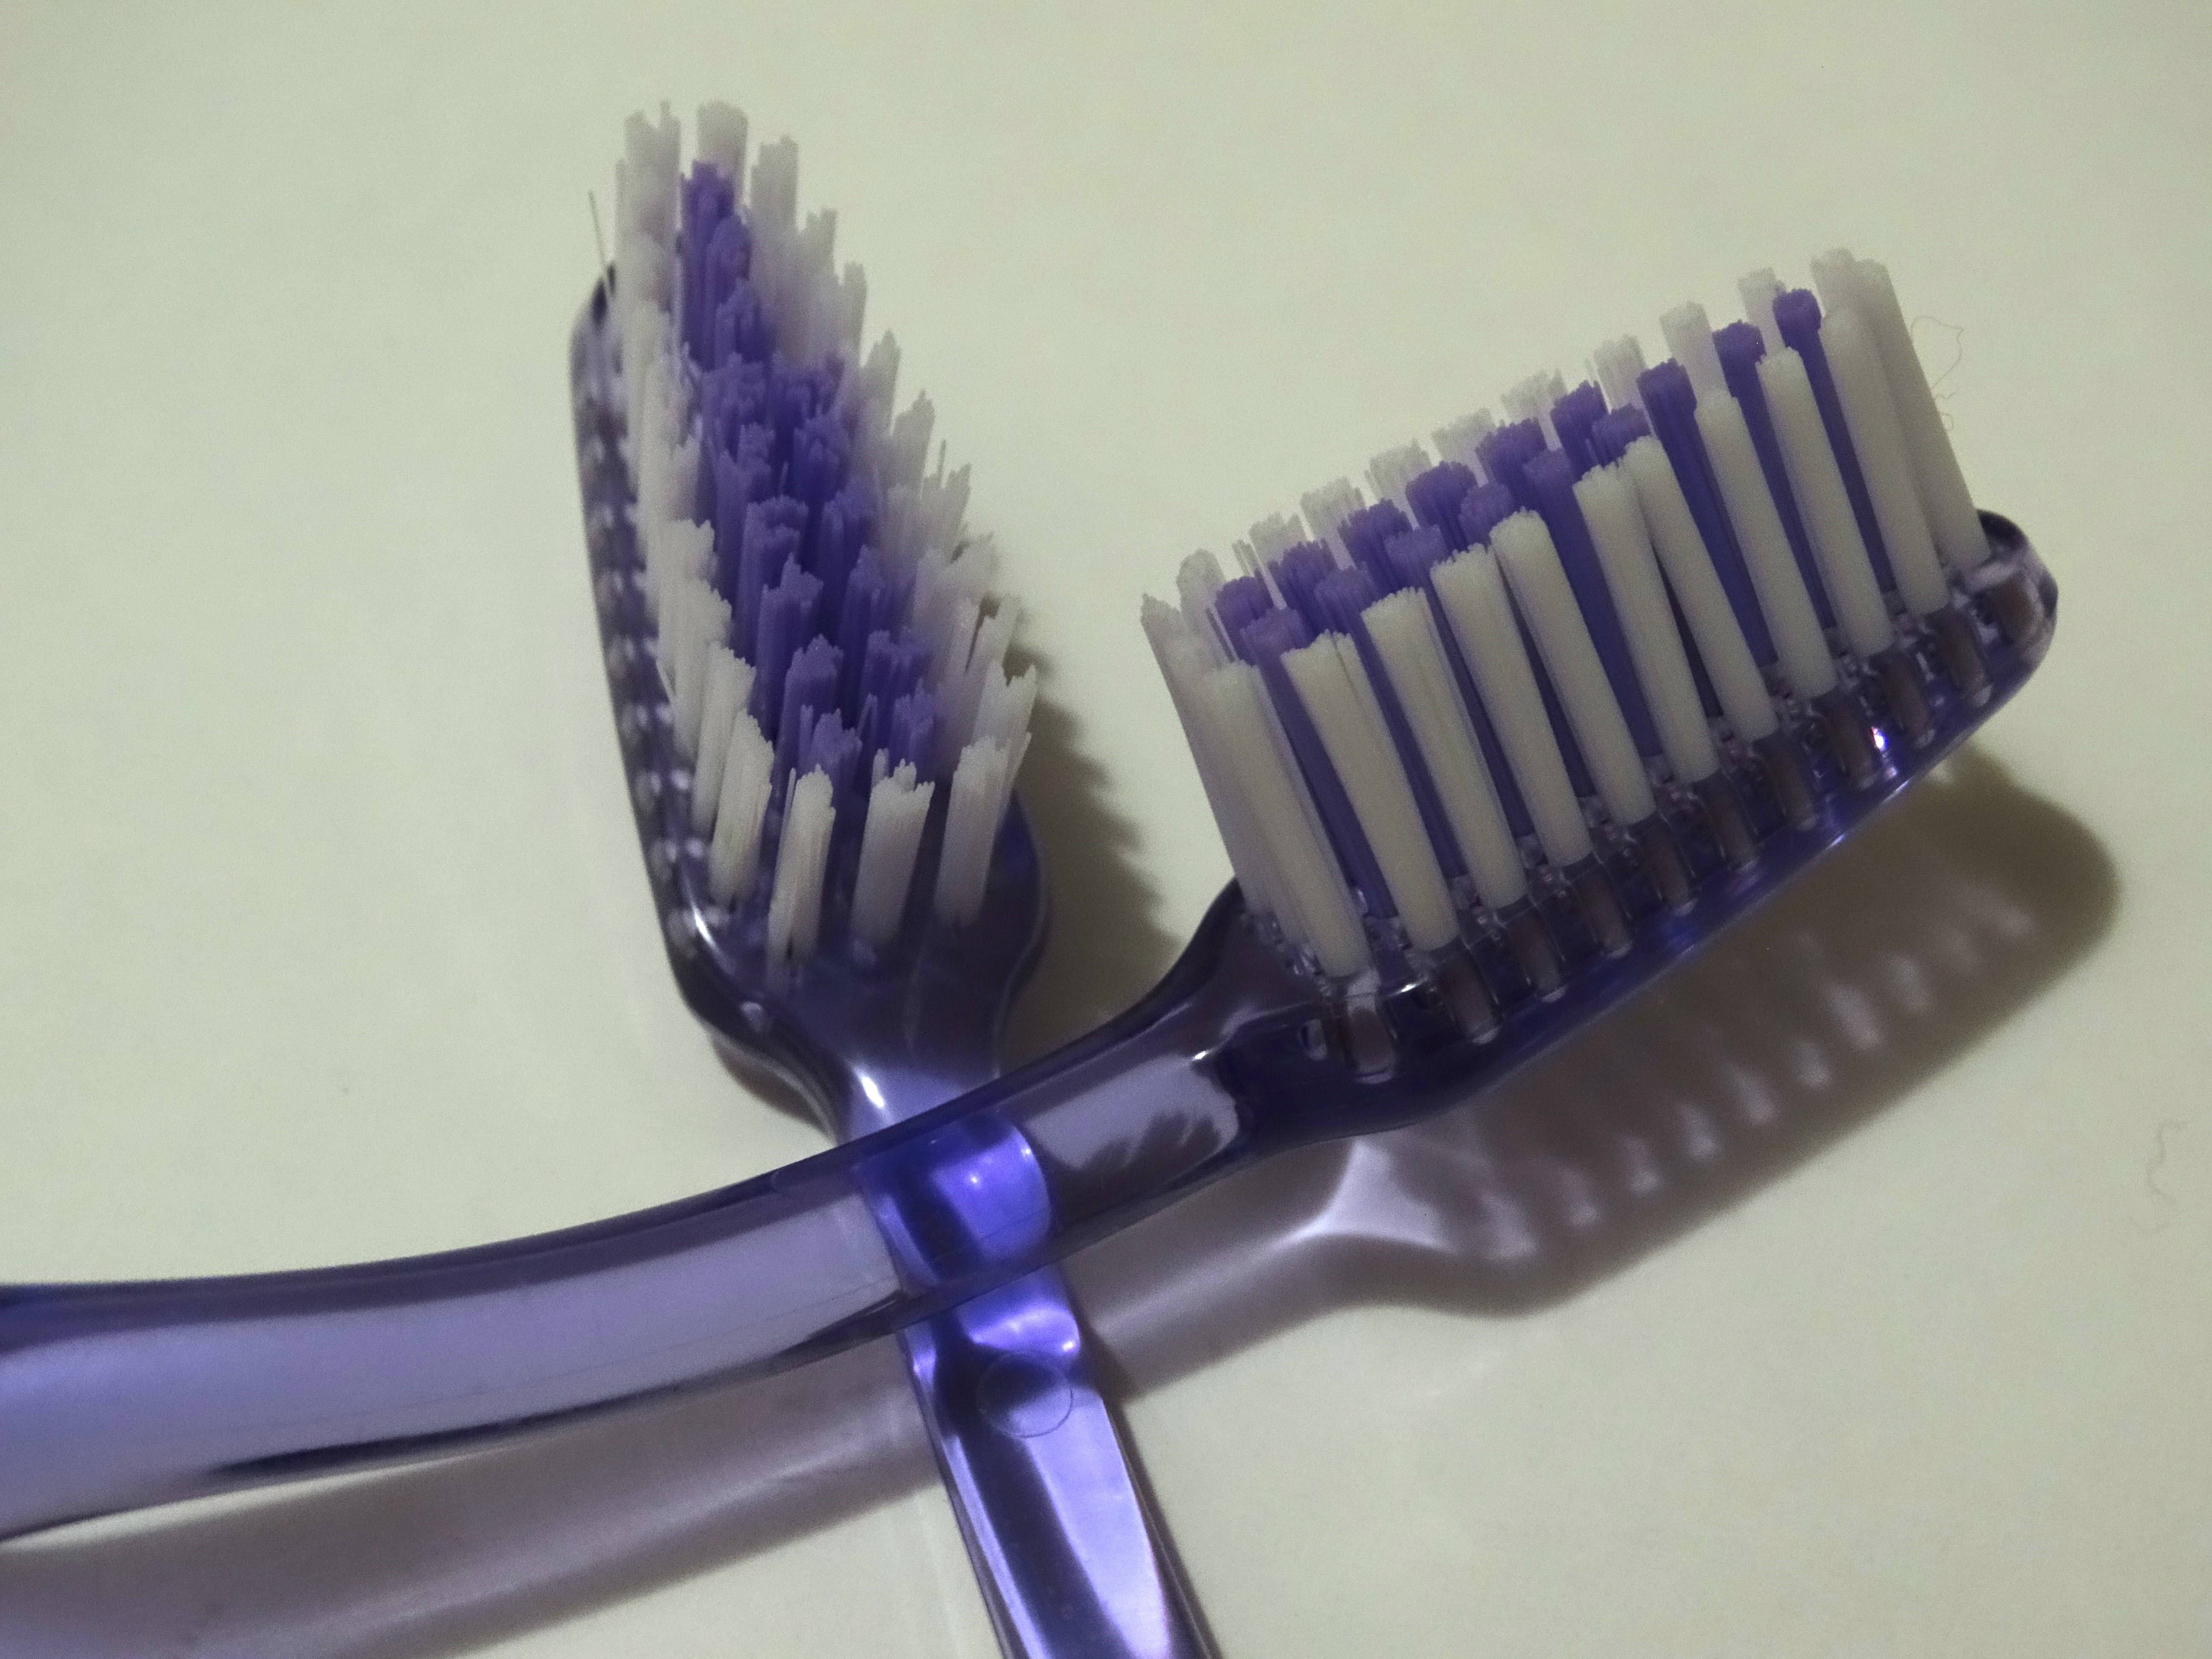 two purple toothbrushes